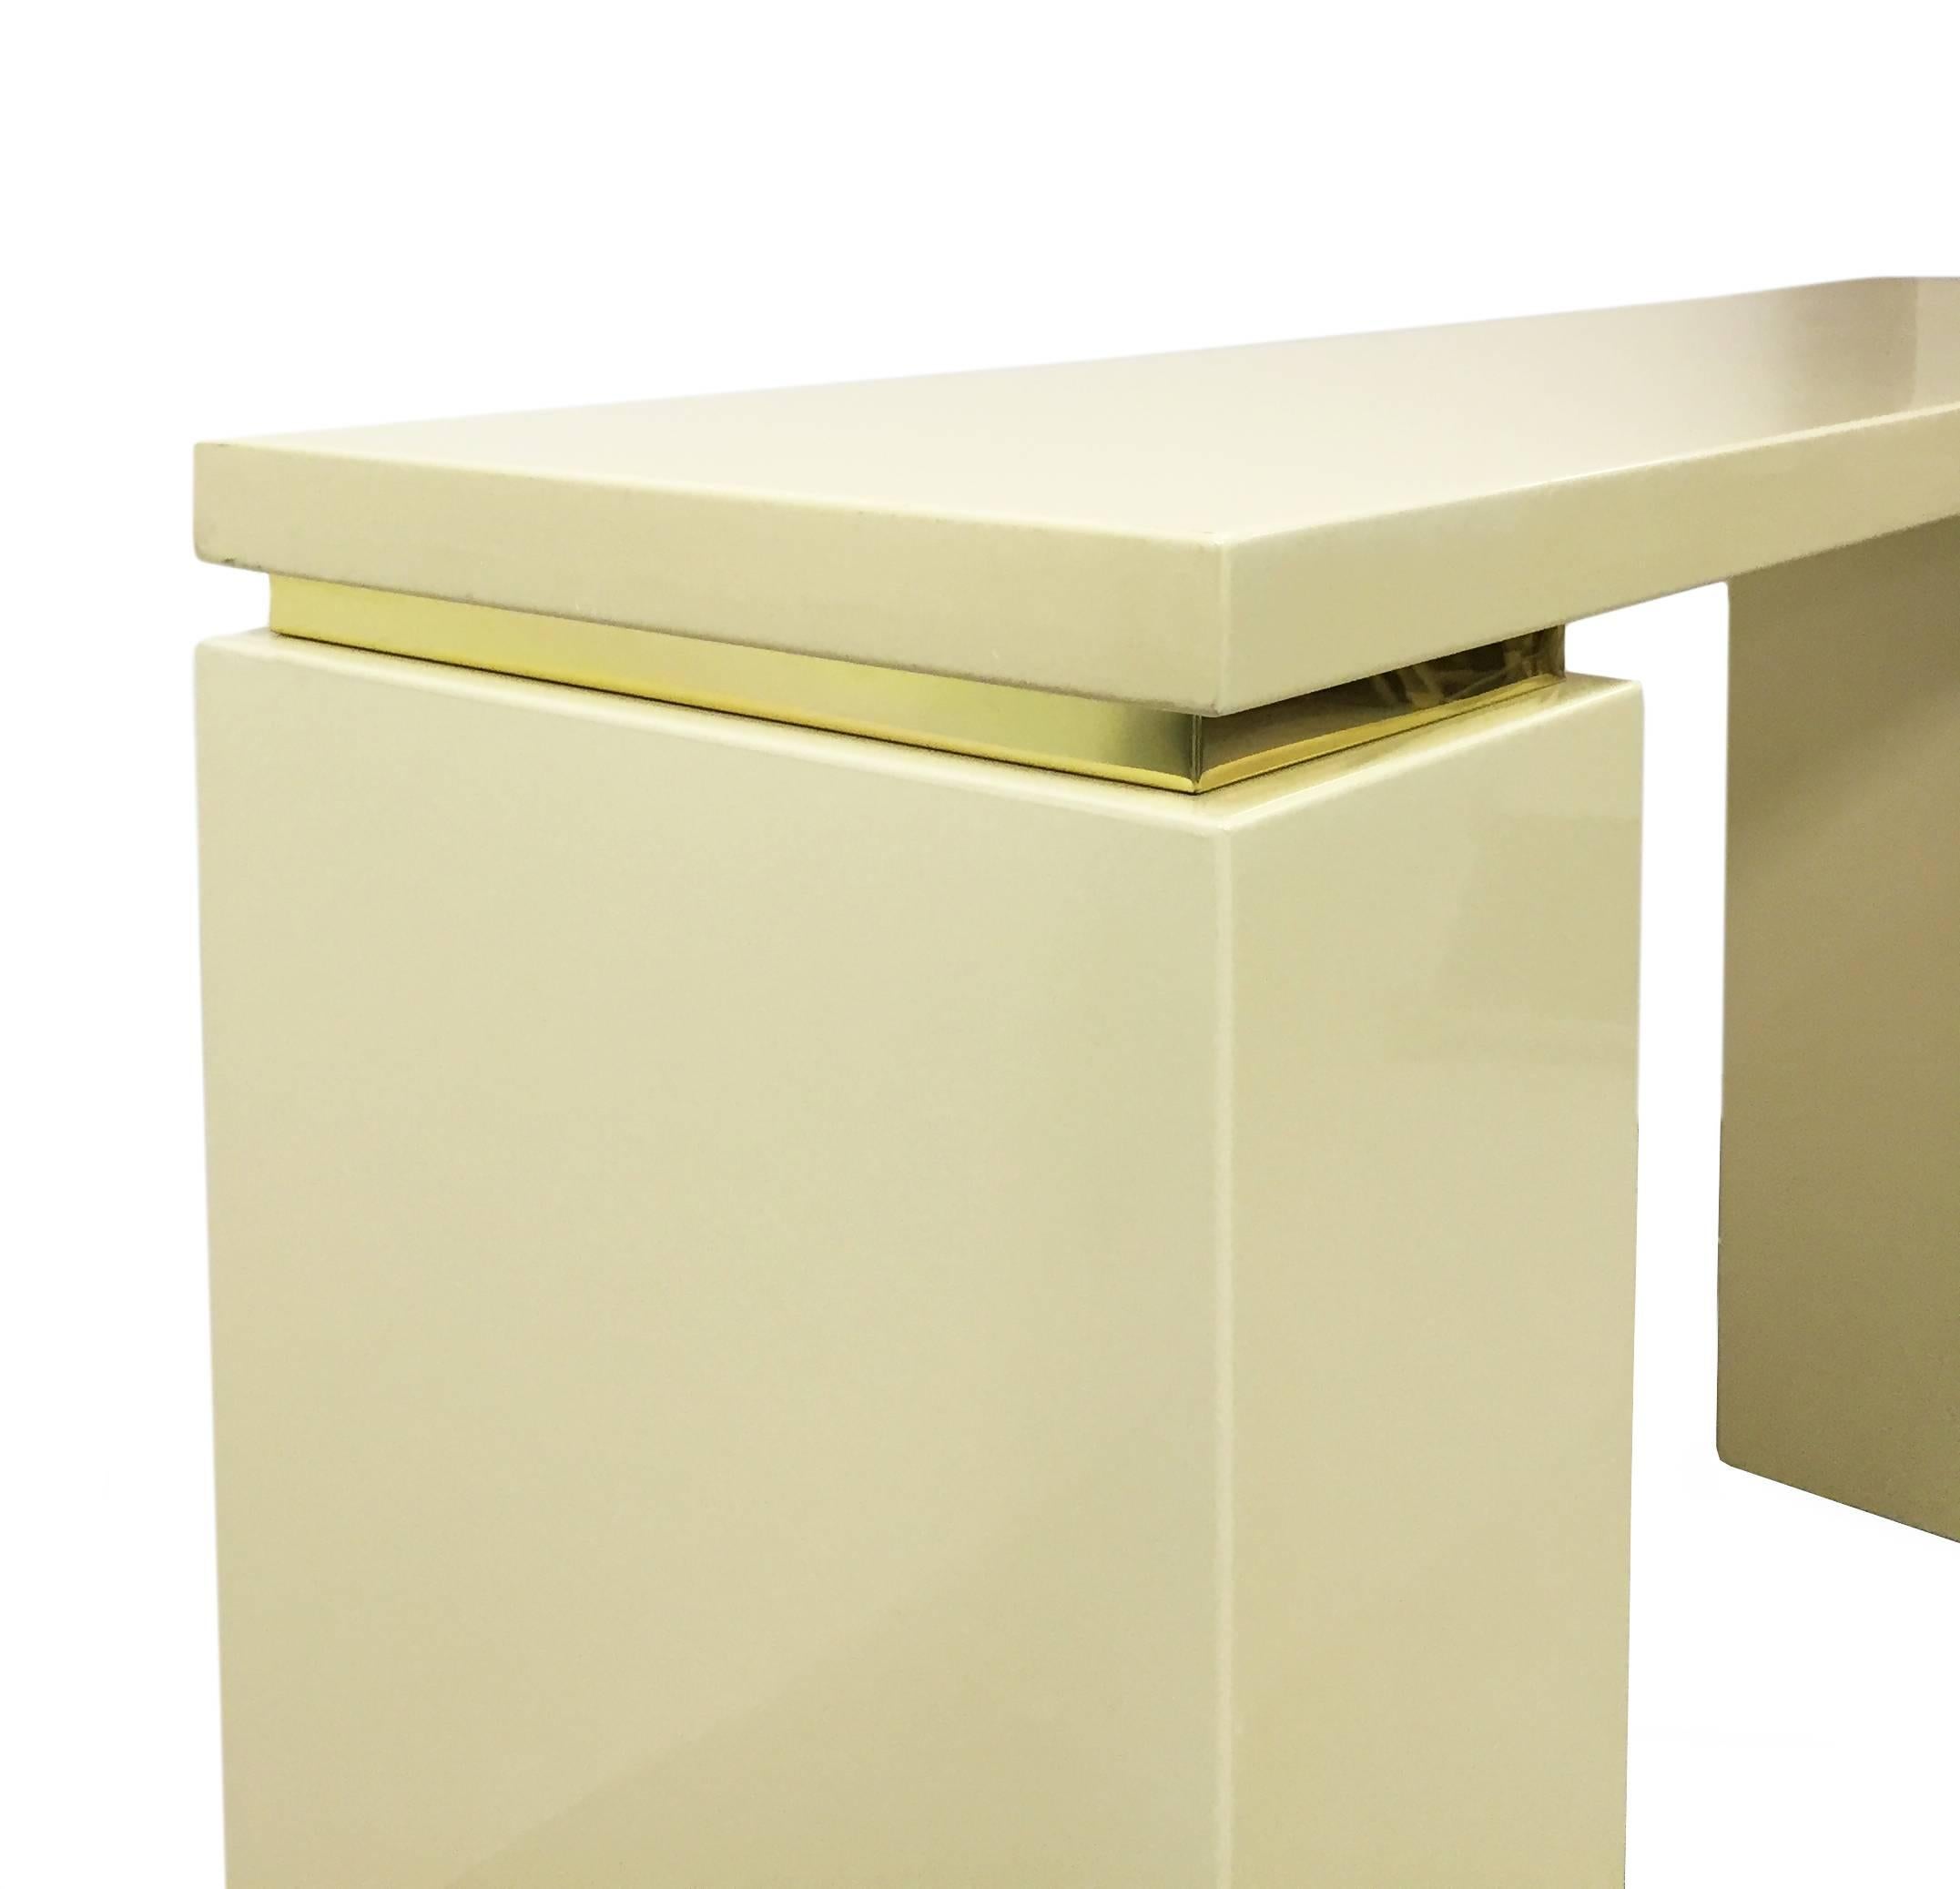 Ivory lacquer console with brass banding detail by Jean Claude Mahey - French, 1970's.